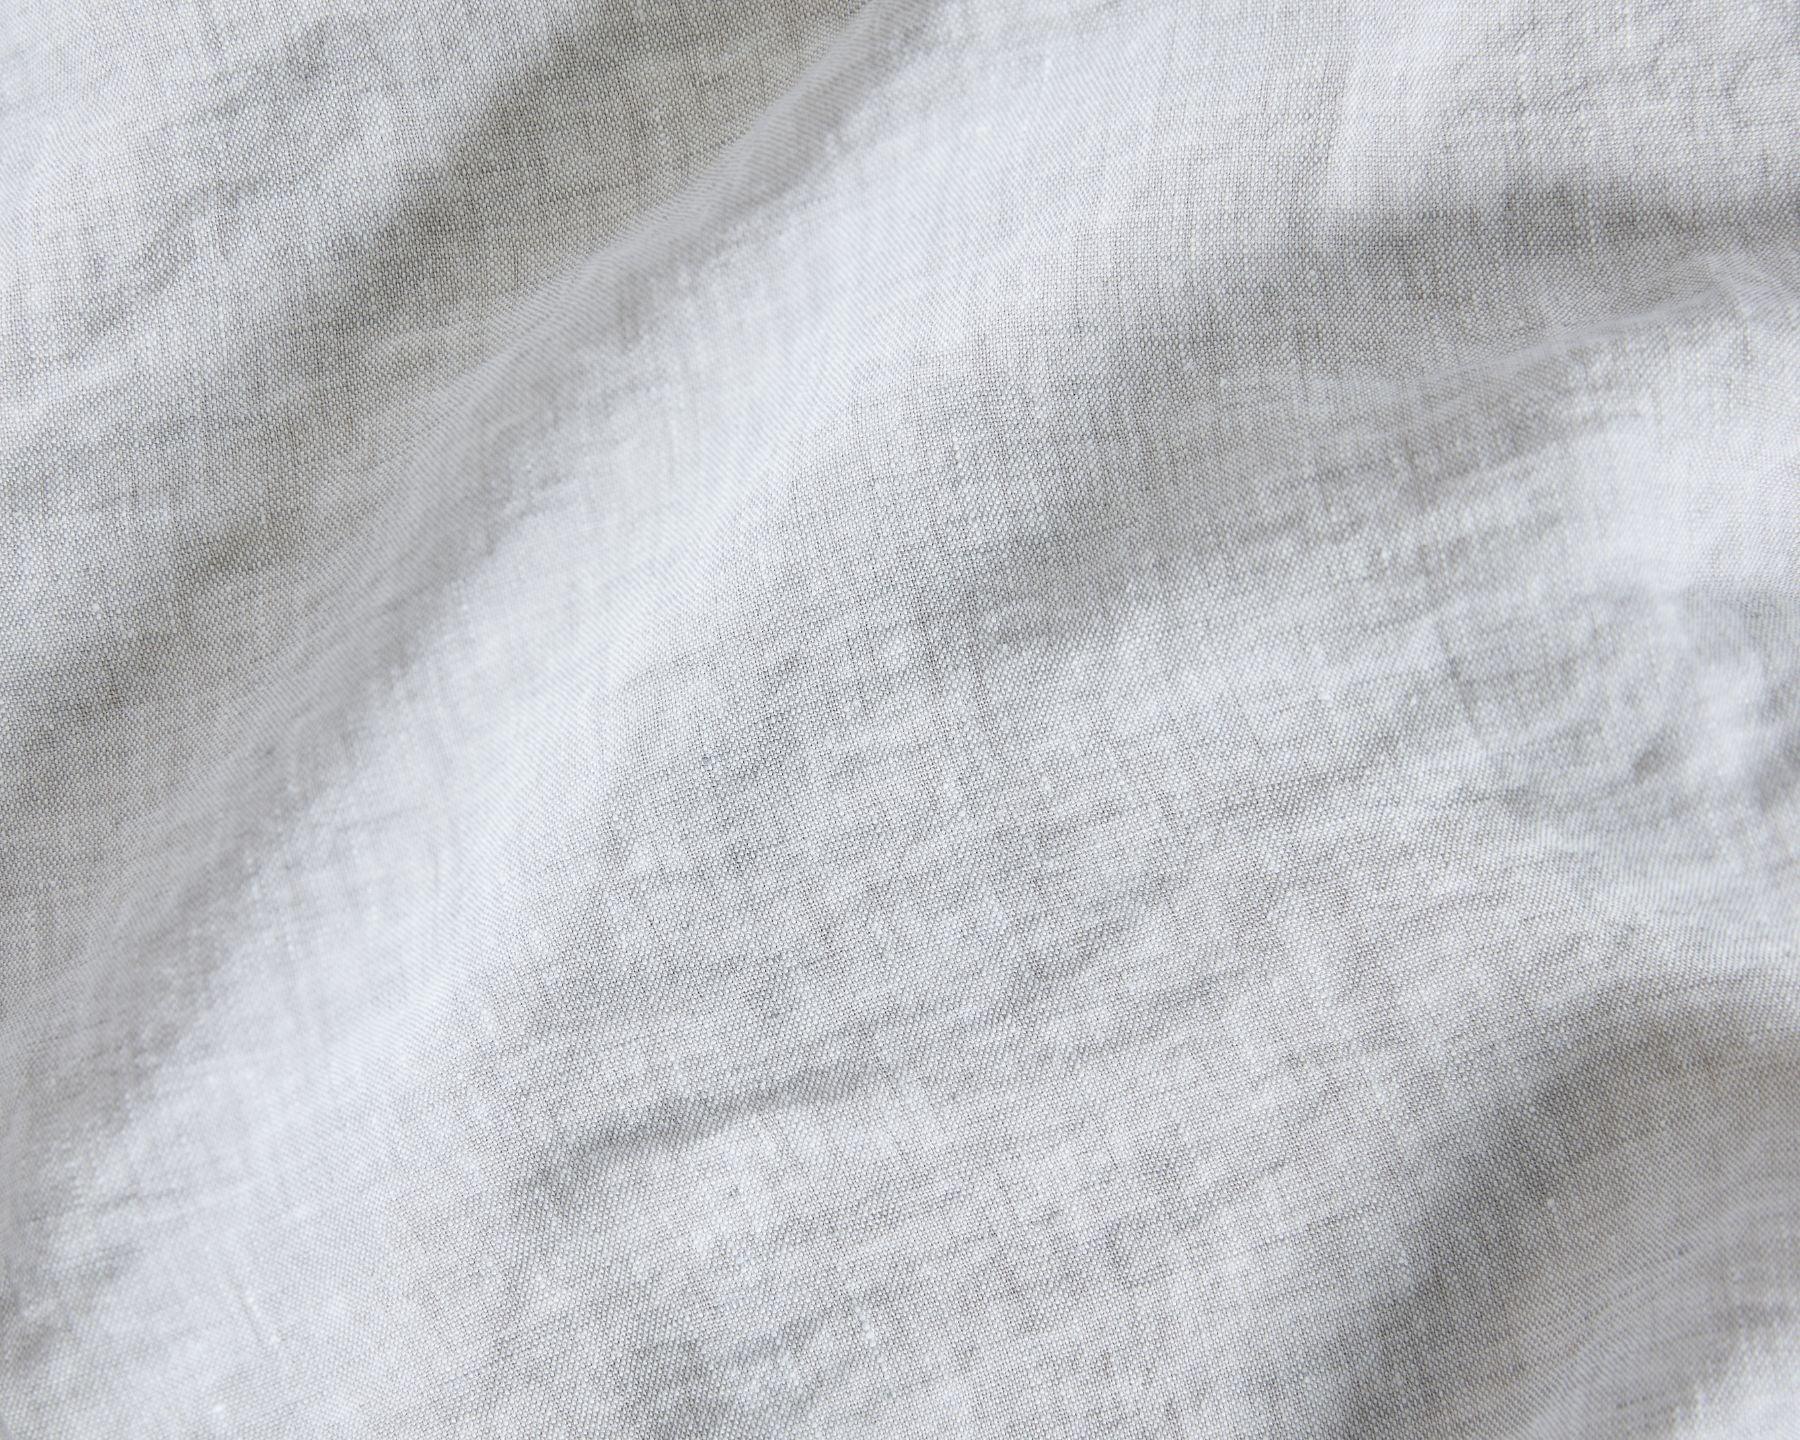 Organic linen top sheet from premium European flax. Chambray grey color.